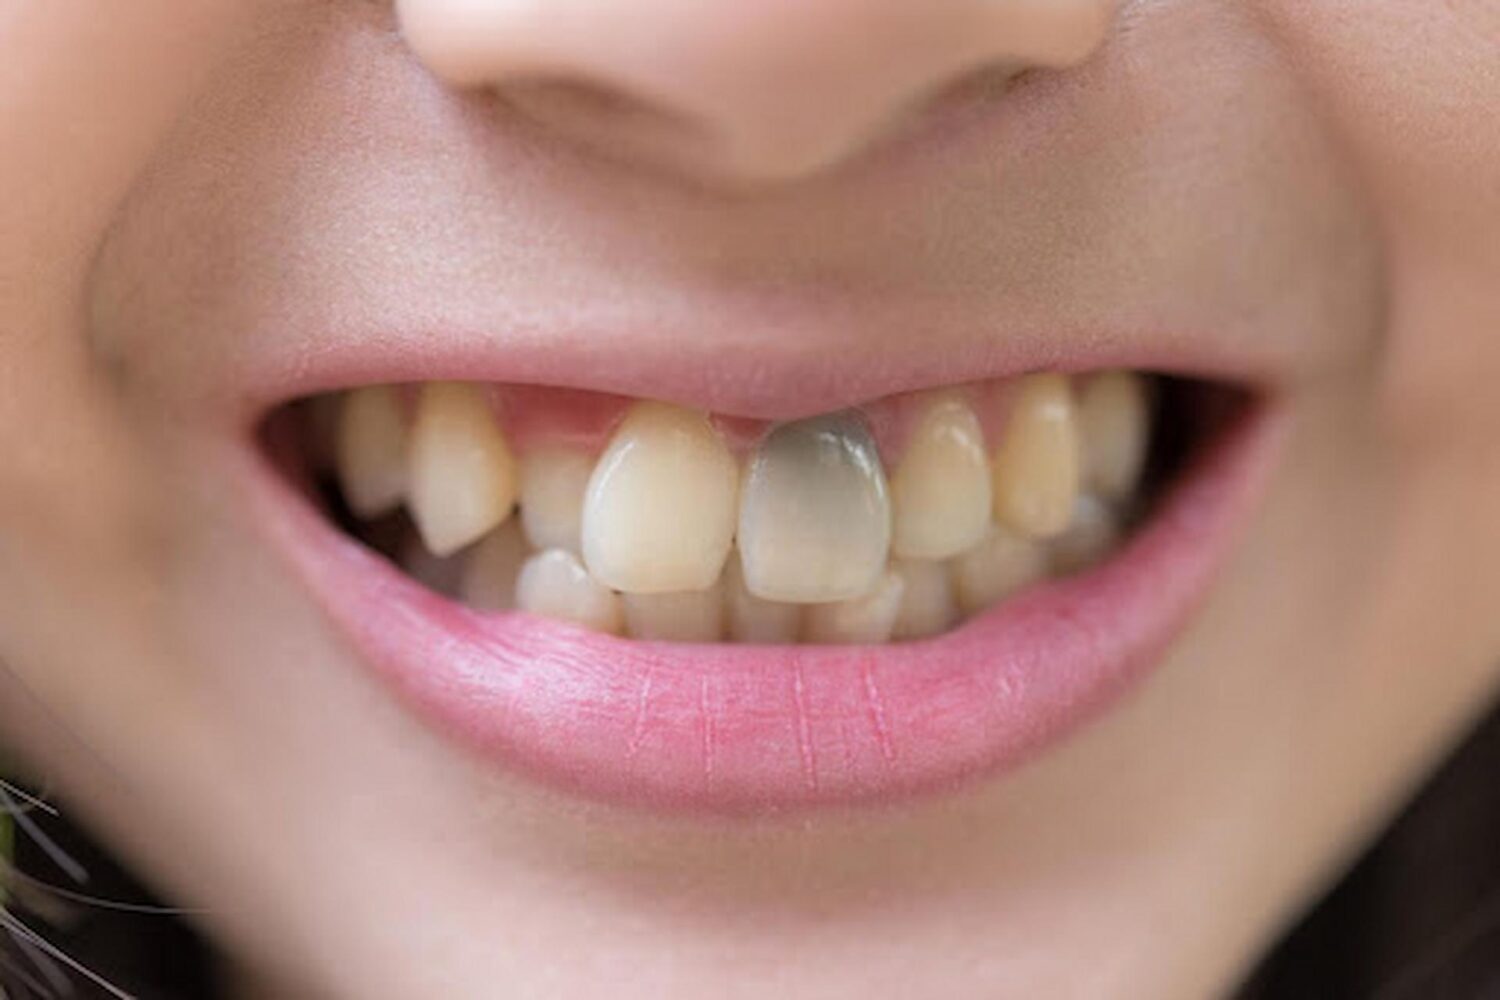 Can Teeth Whitening Change the Inside Color of Our Teeth?